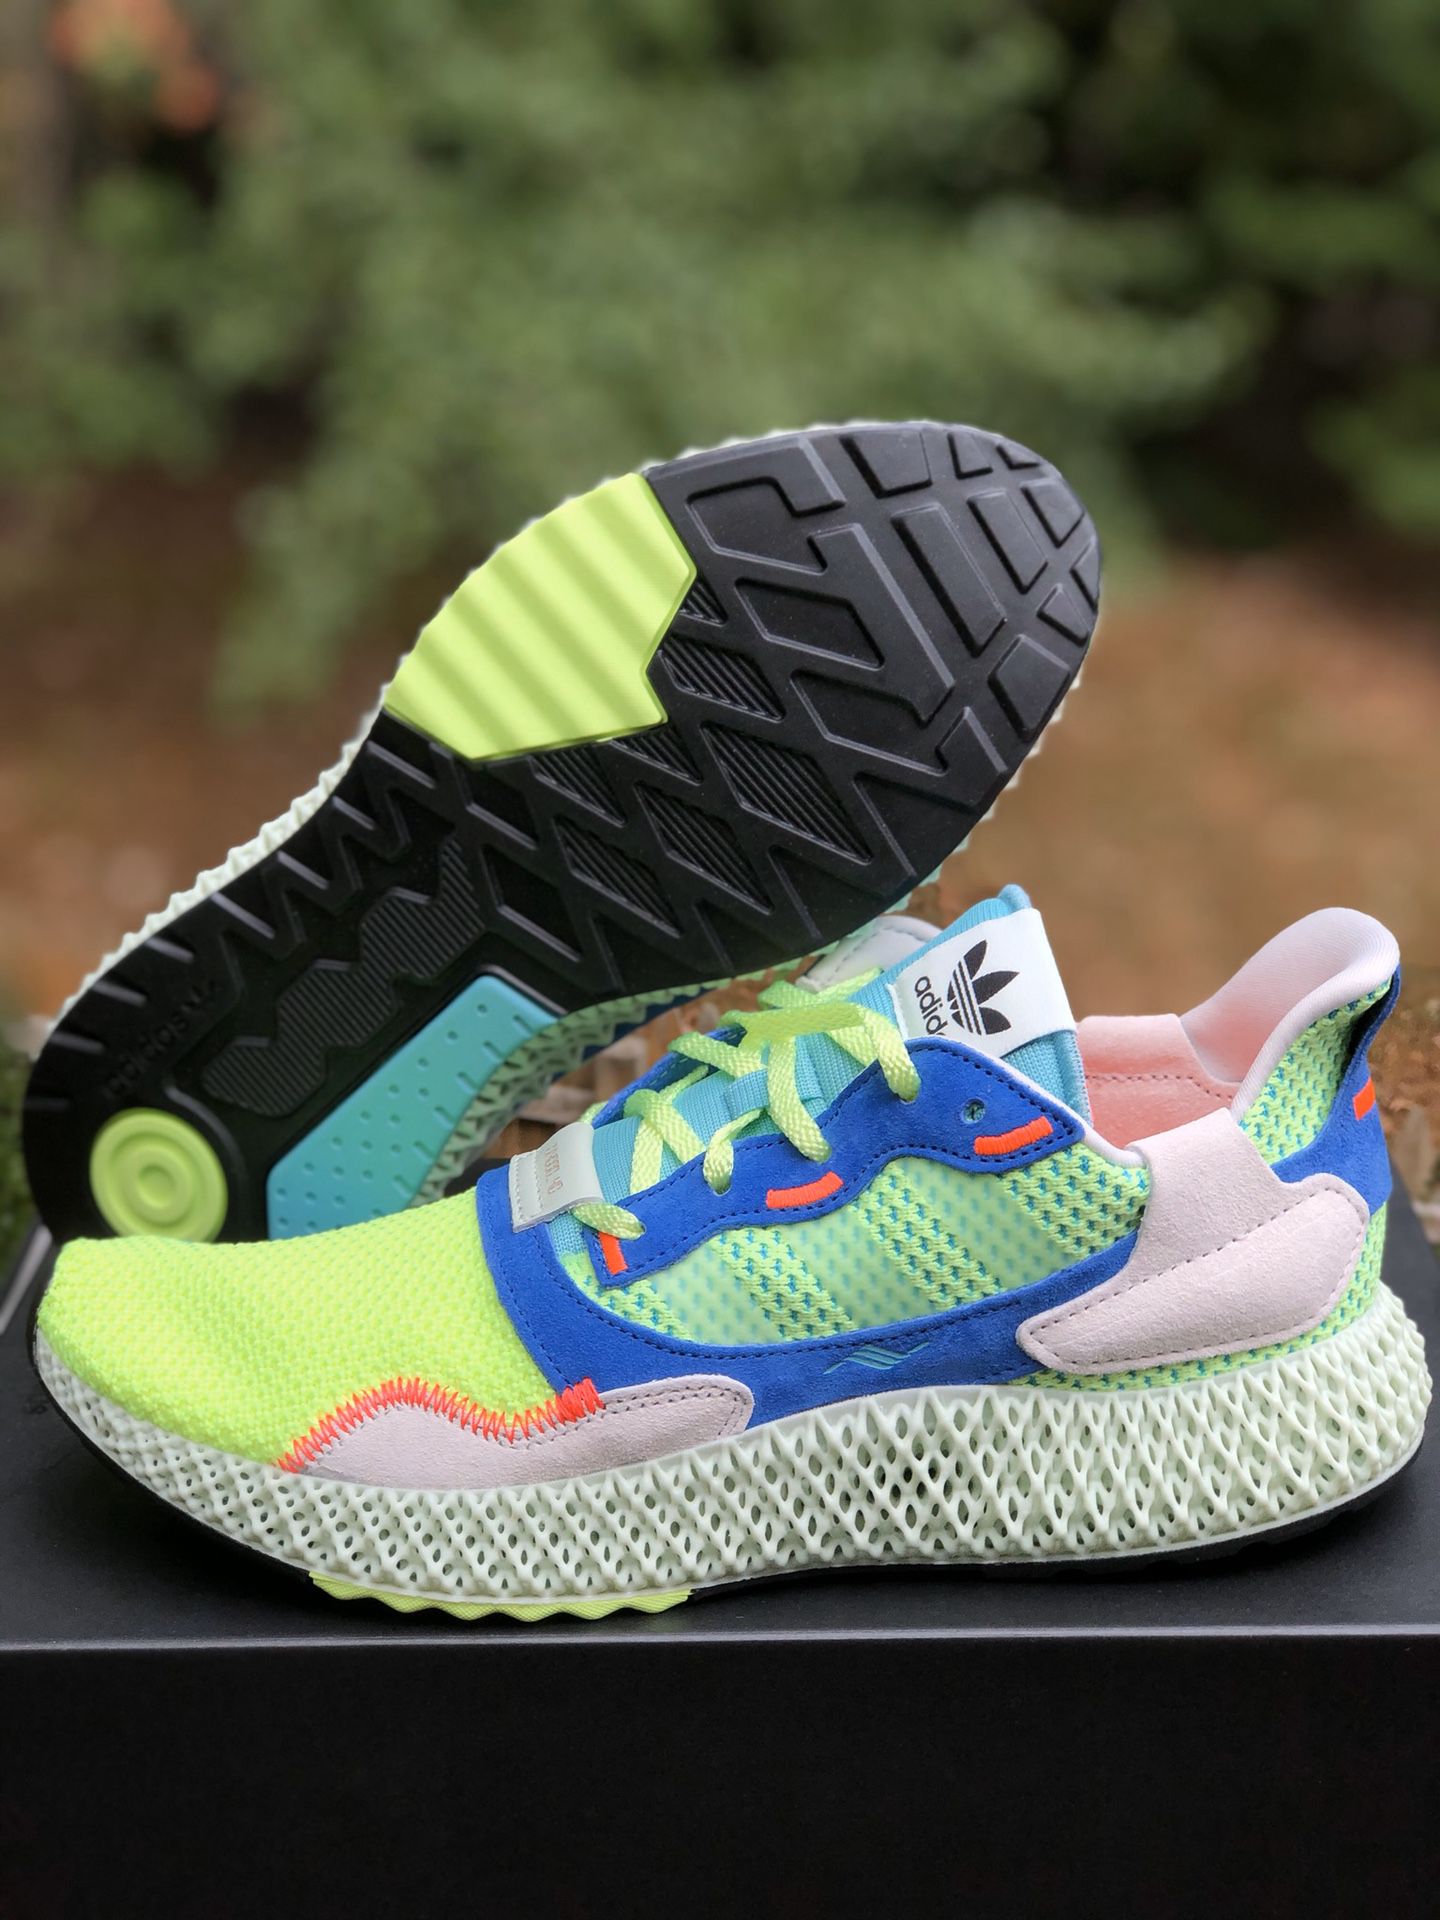 adidas ZX4000 4D Easy Mint size 10.5